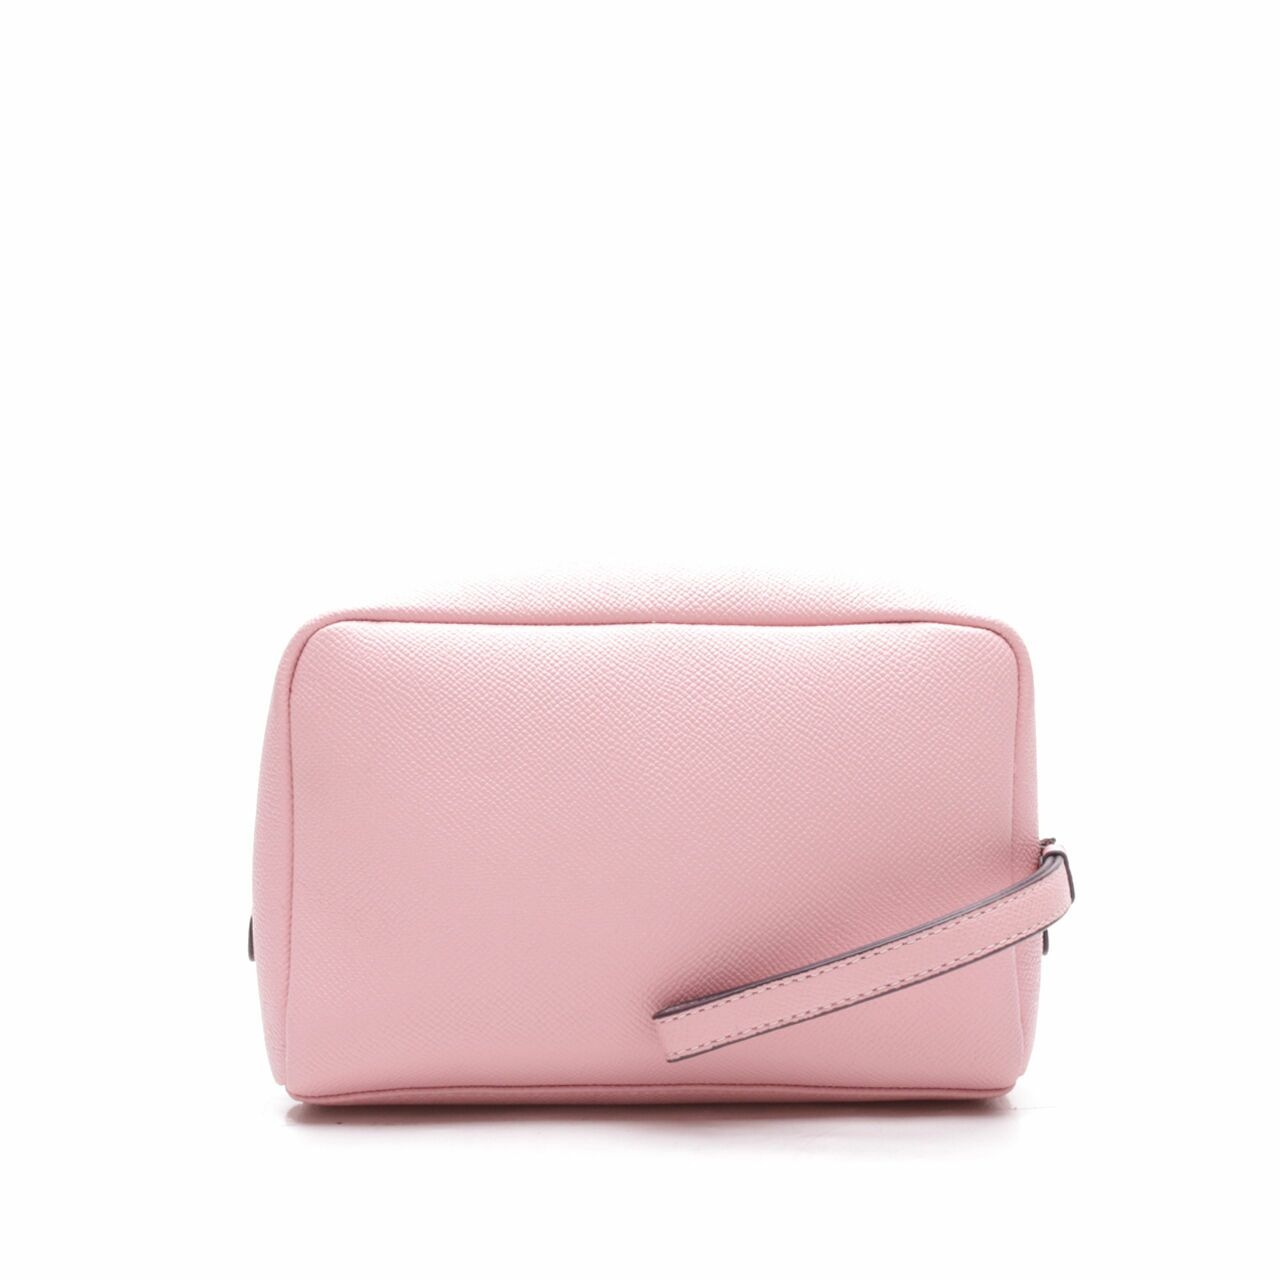 Coach Pink Cosmetic Case